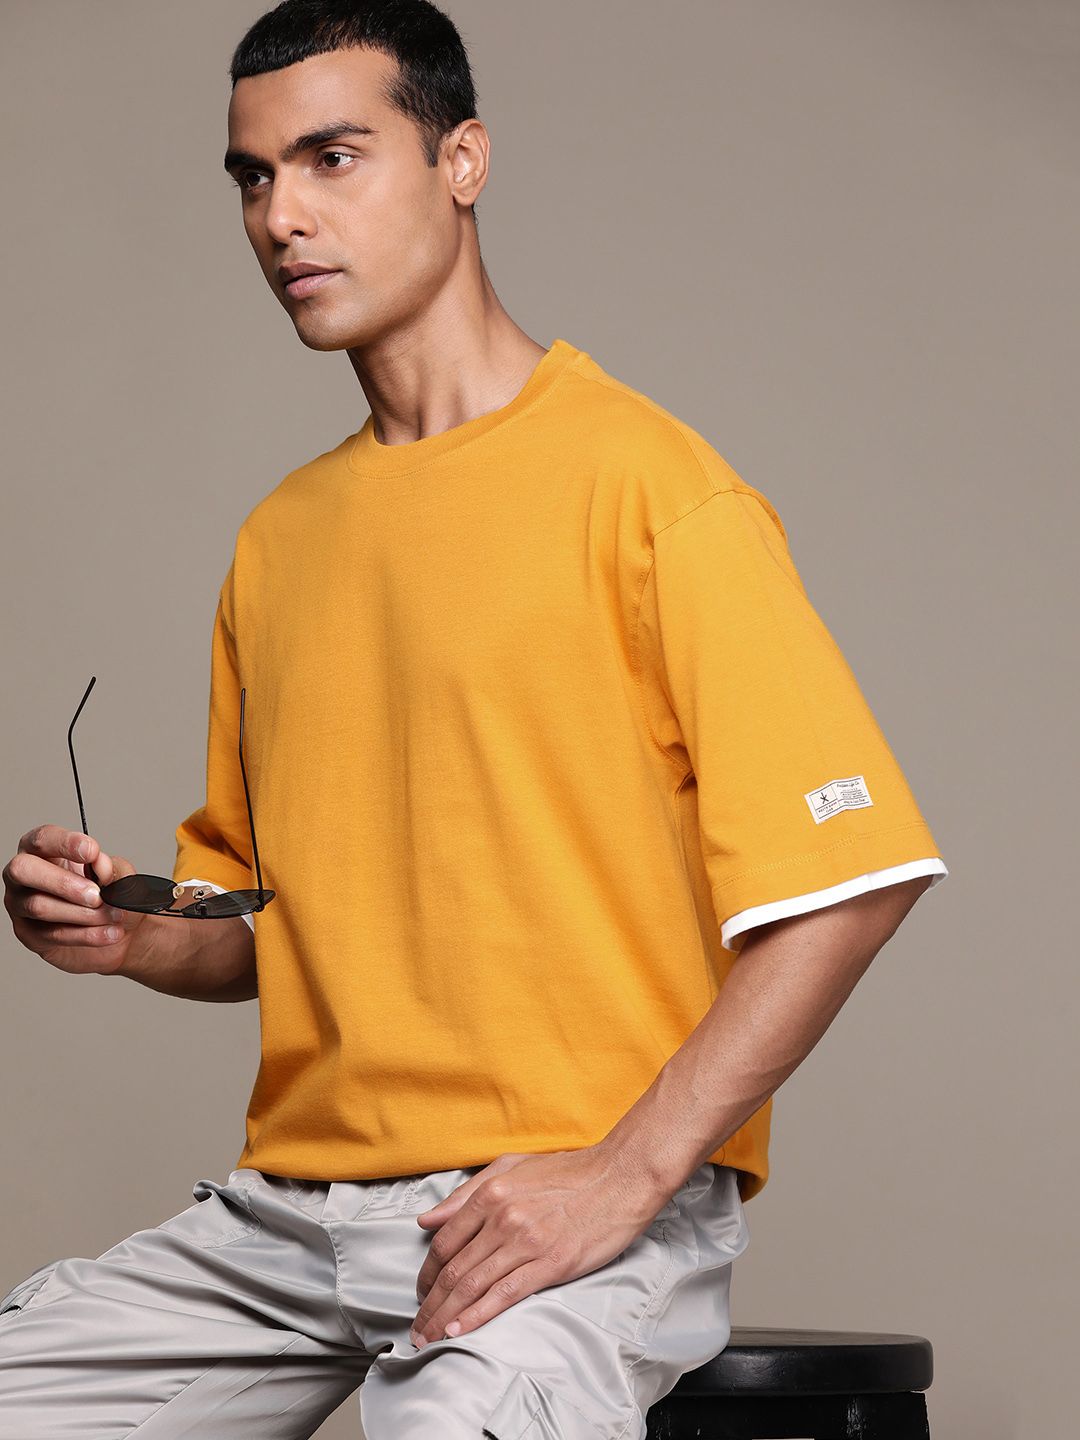 The Roadster Lifestyle Co. Drop-Shoulder Sleeves Relaxed Fit Pure Cotton T-shirt